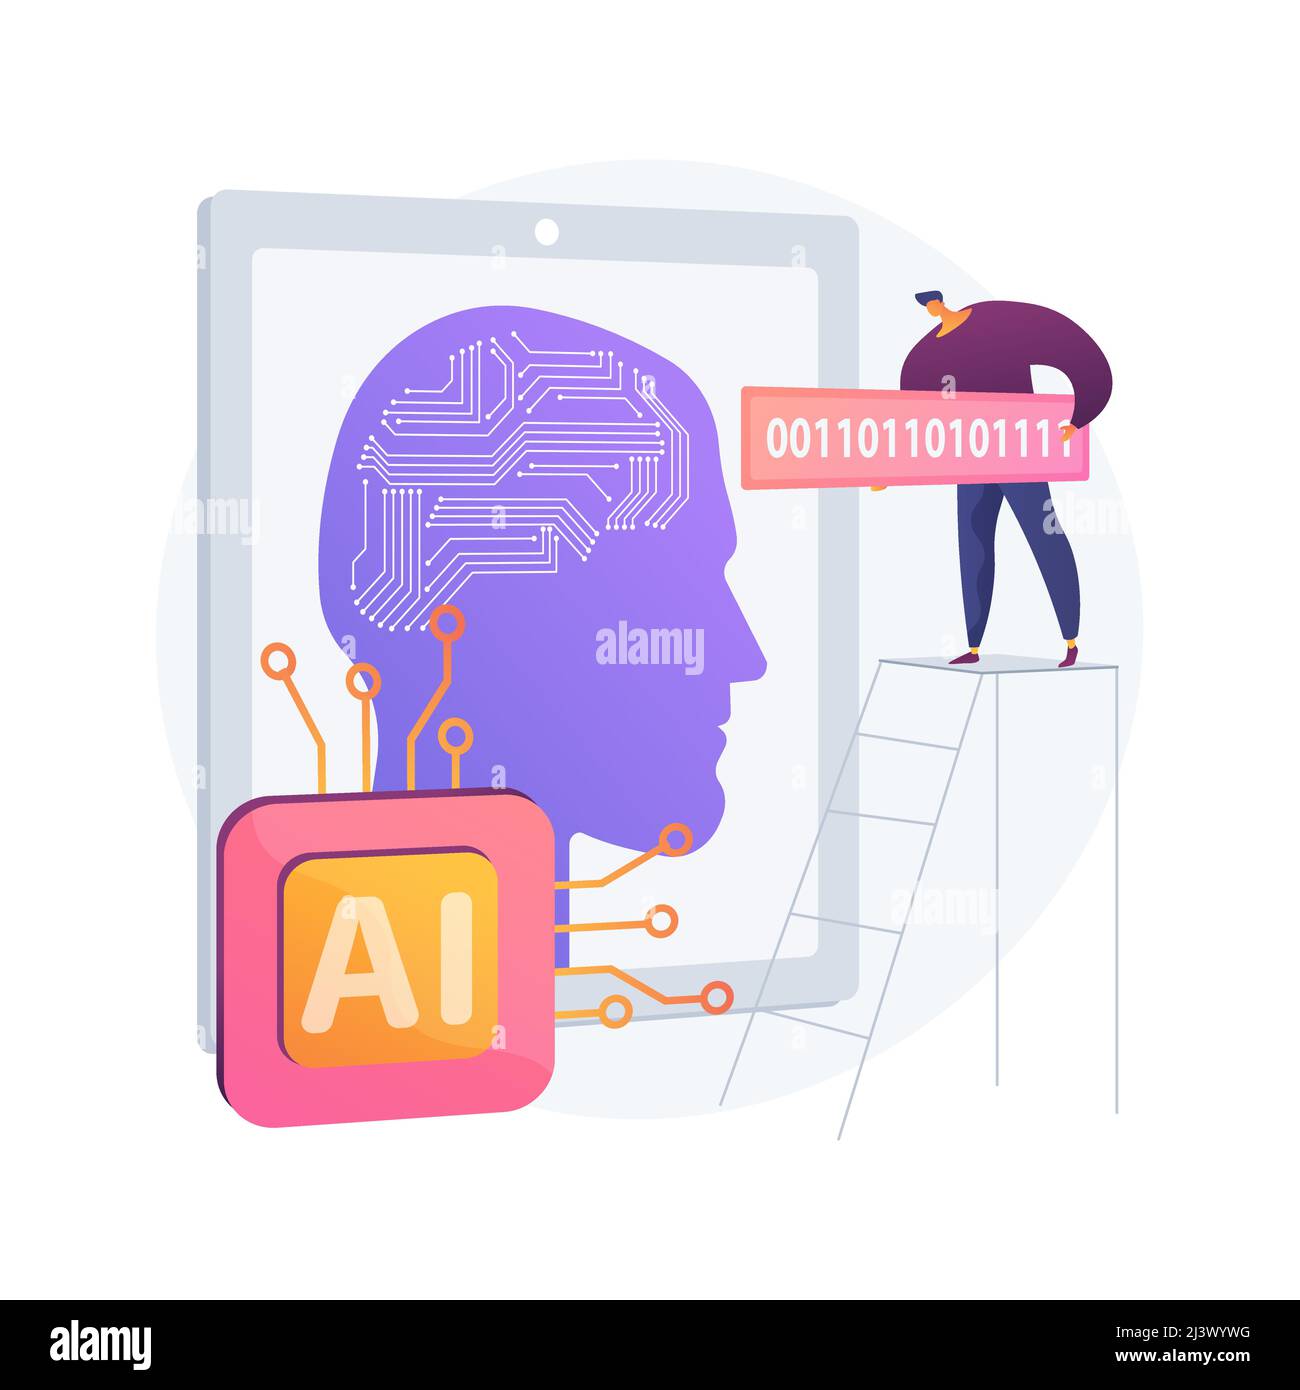 Artificial intelligence abstract concept vector illustration. AI, machine learning, artificial intelligence evolution, high tech, cutting edge technol Stock Vector